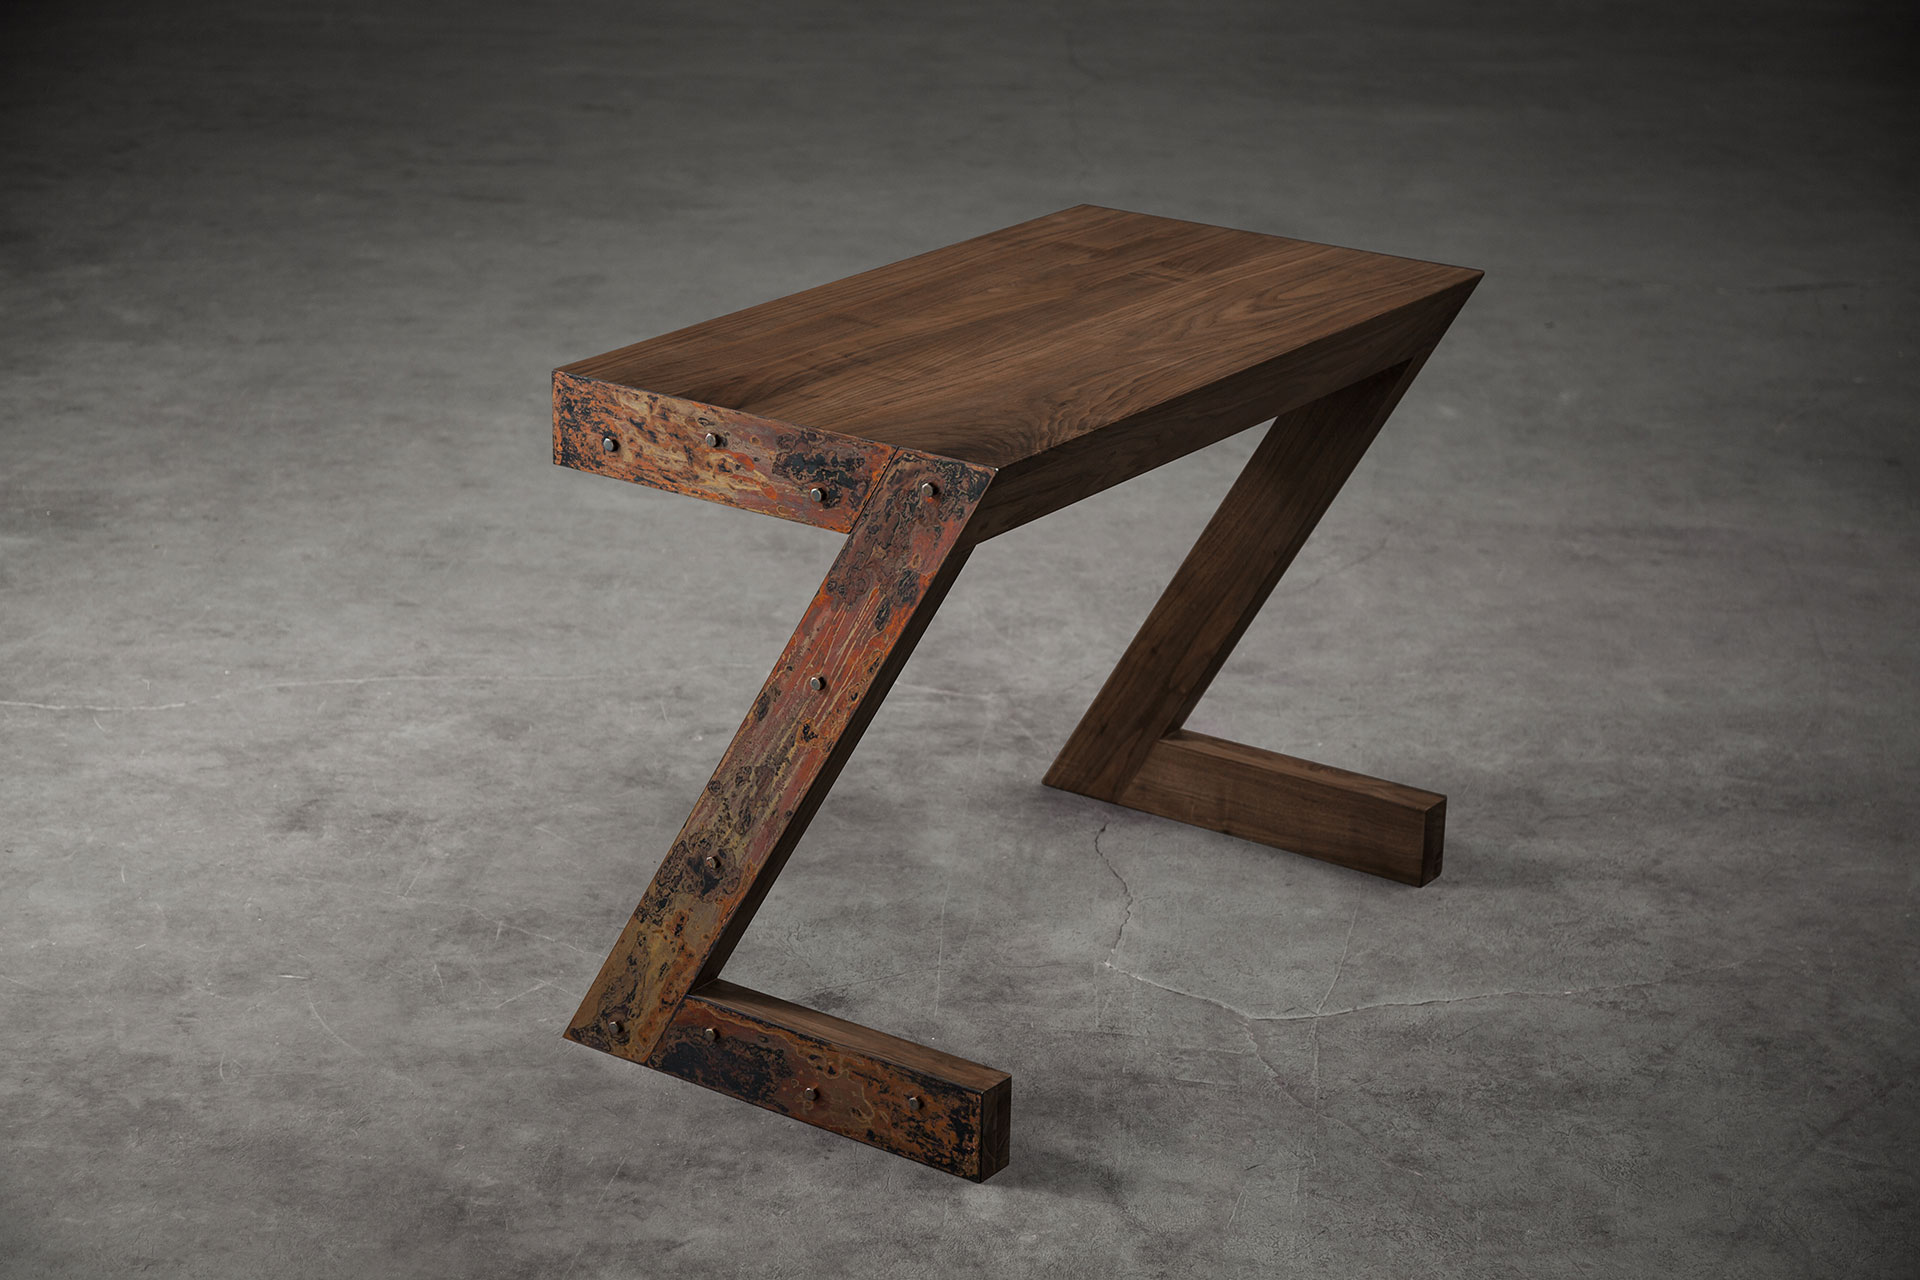 Conceptual design console table in solid American walnut wood